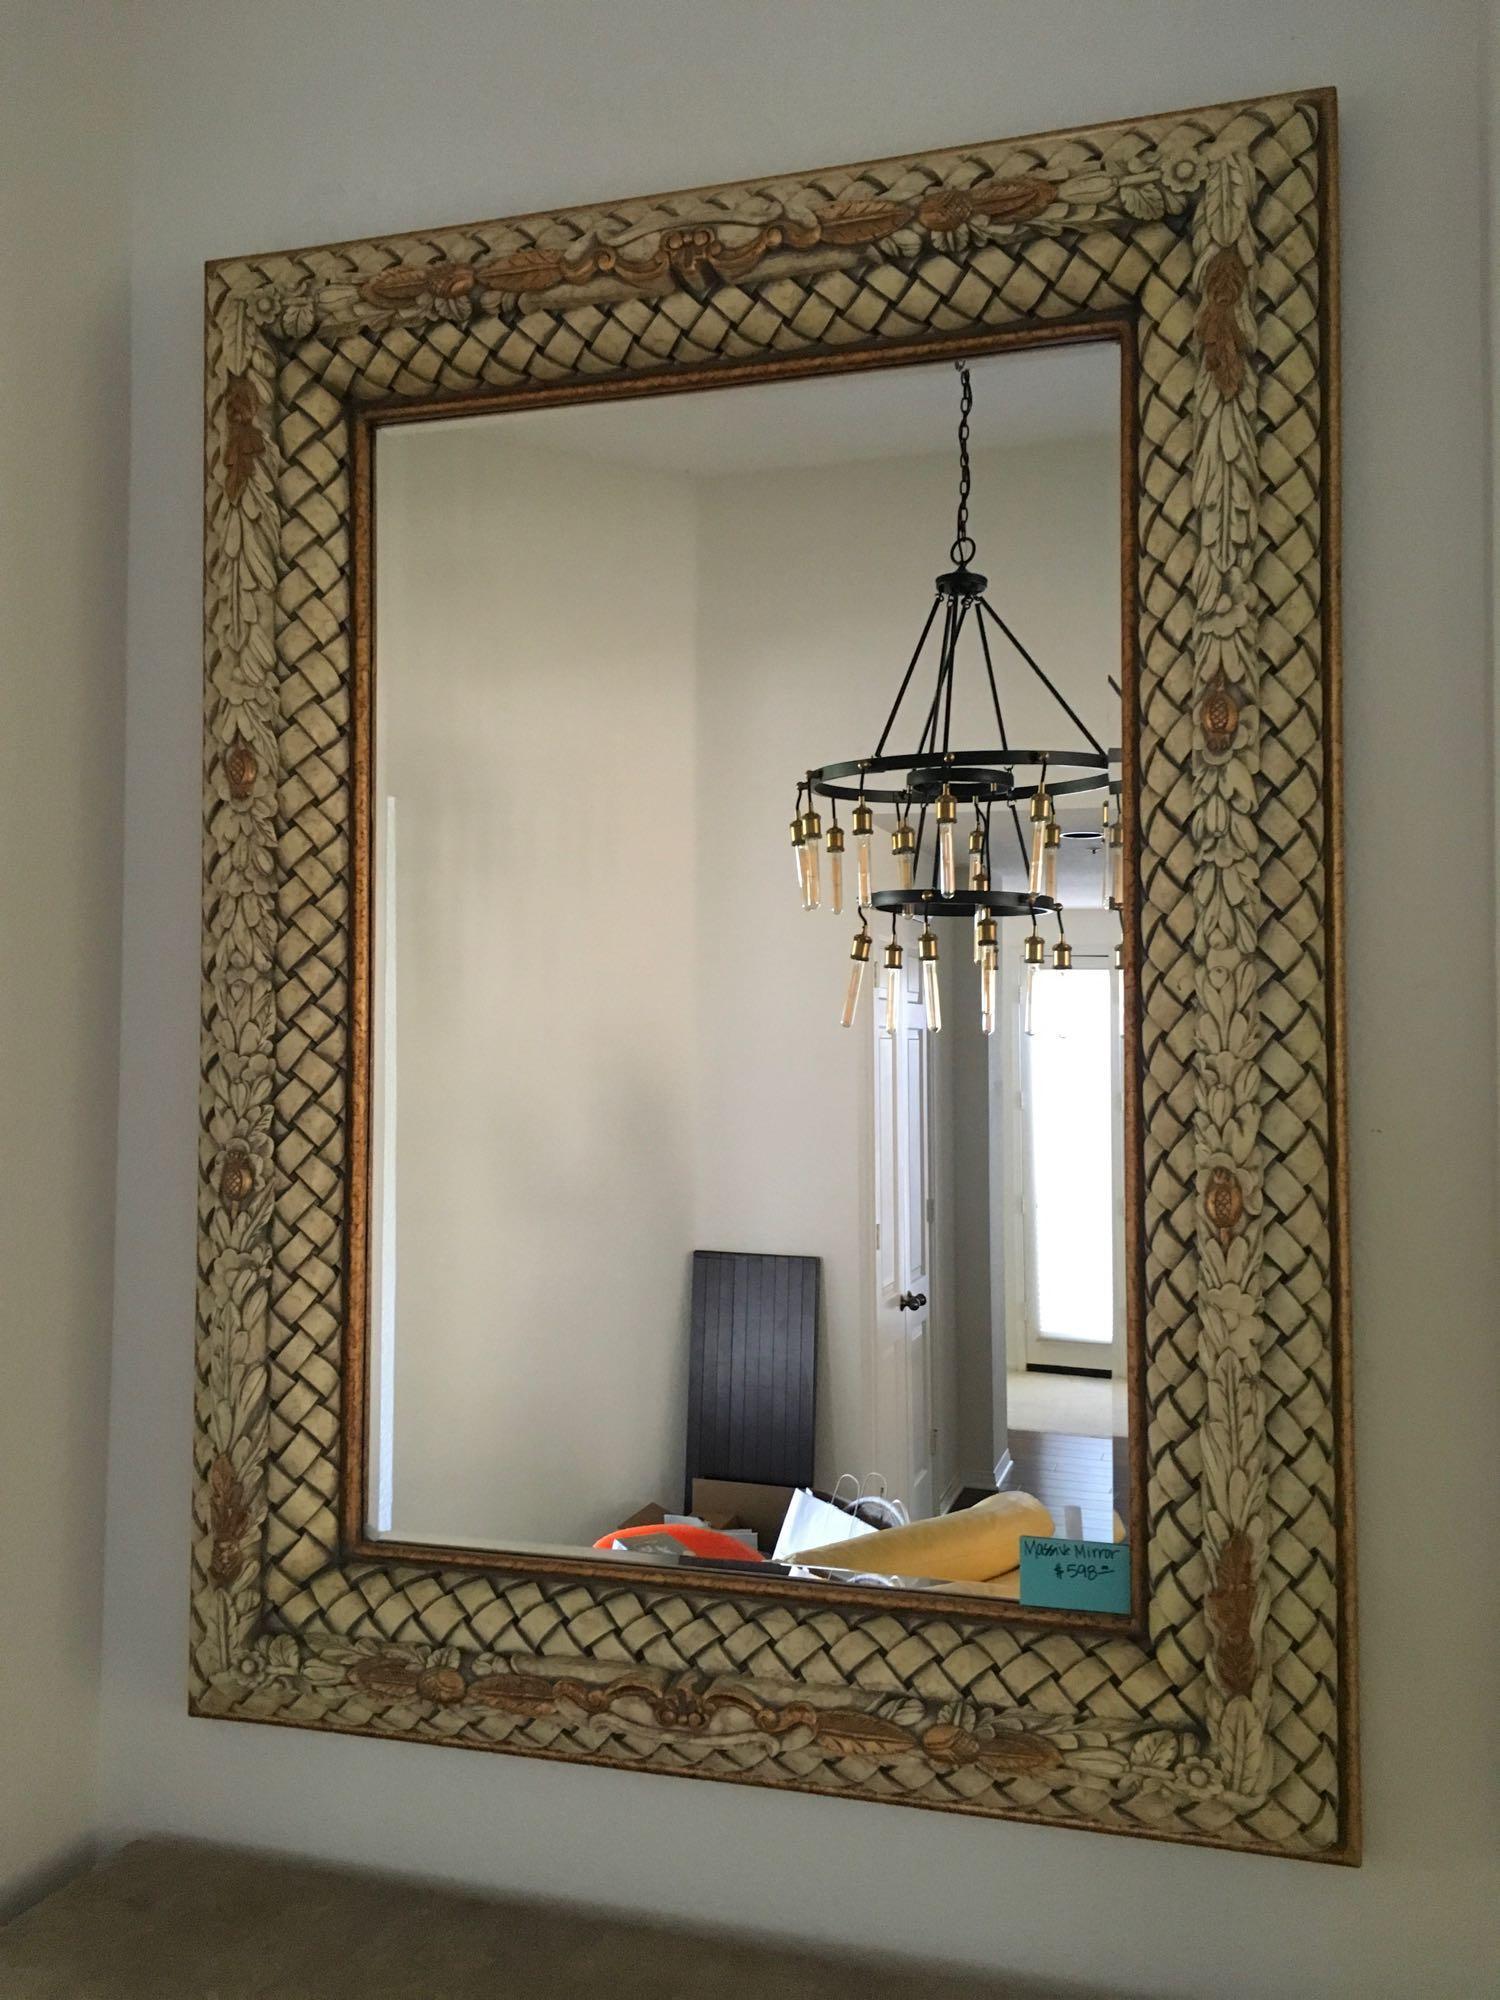 58 1/2" x 75" x 6" Large Foyer Mirror ( be sure to look at the accents in the frame )